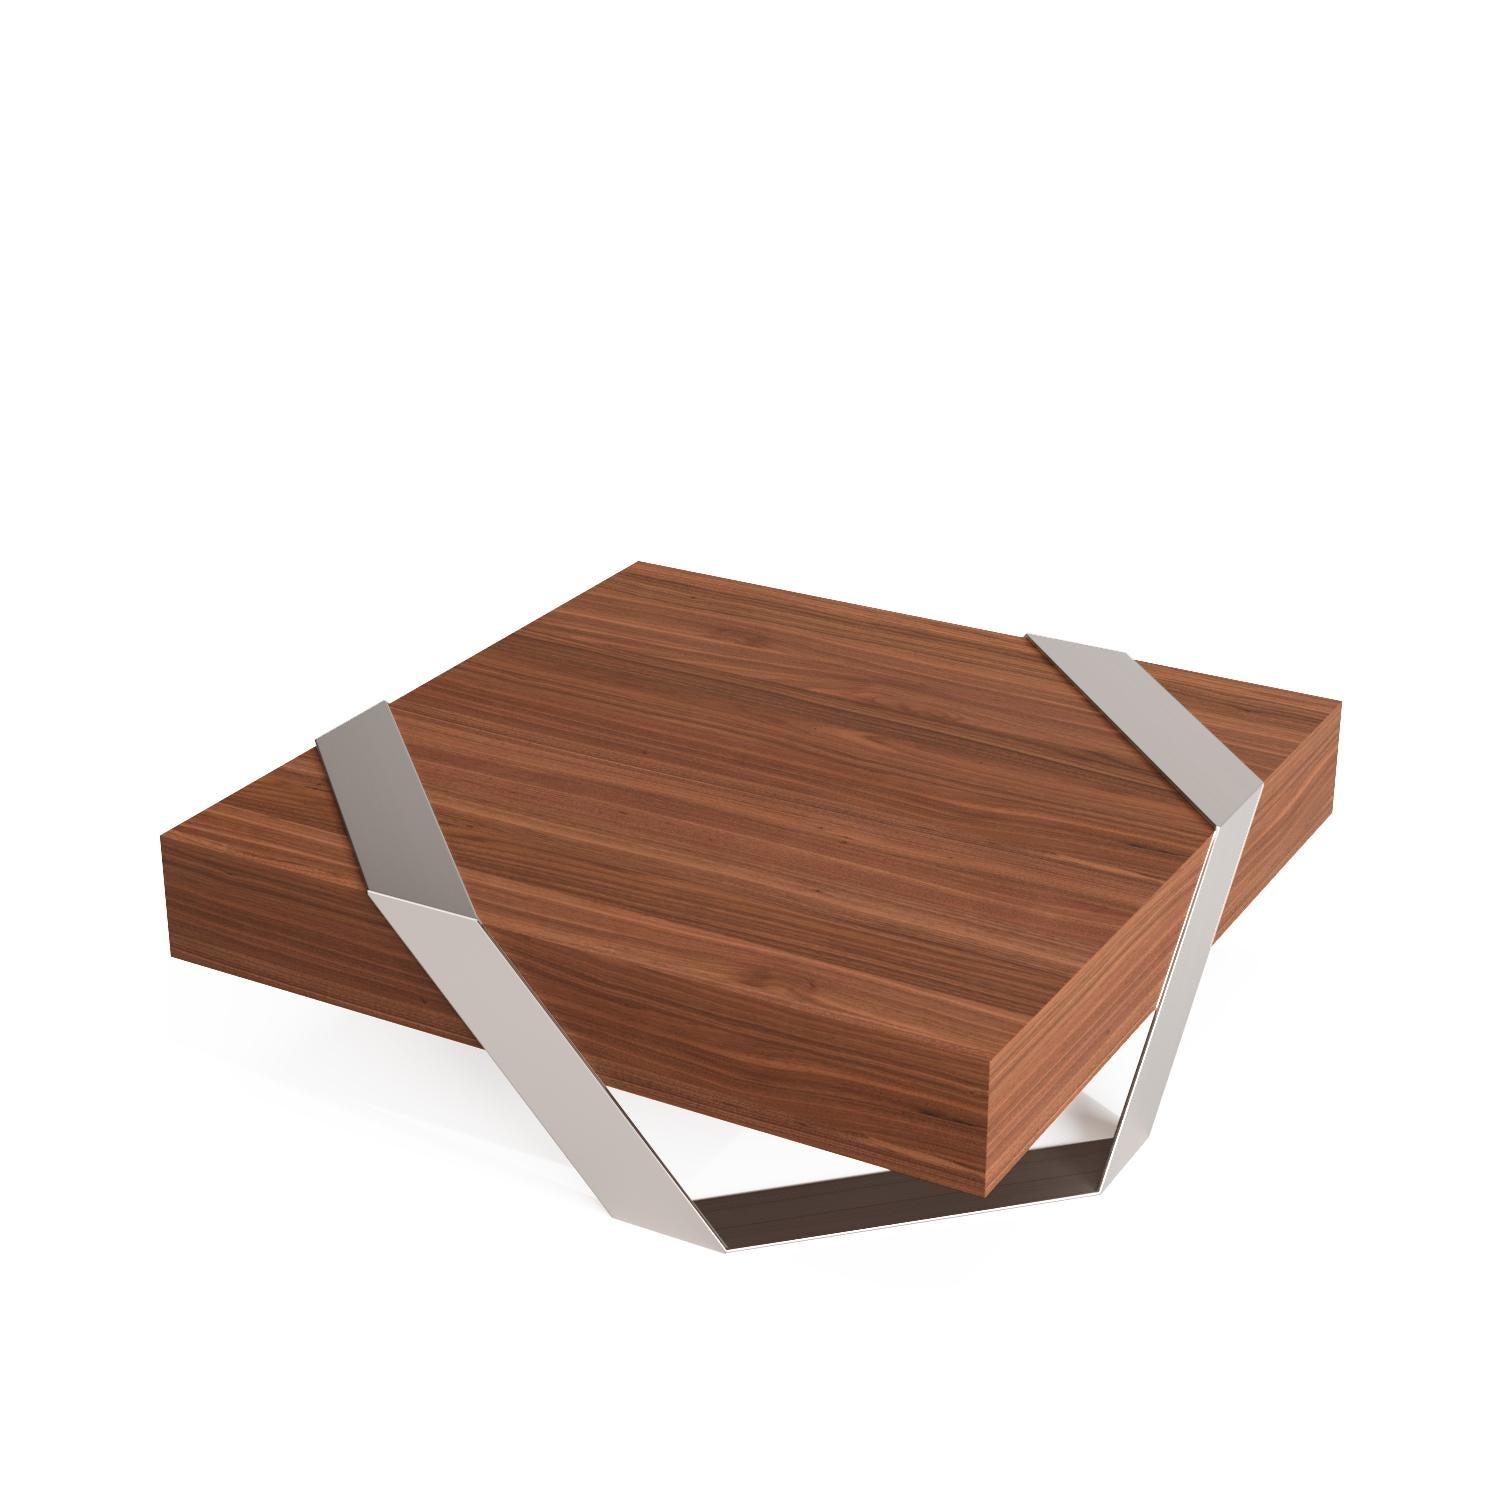 Contemporary Modern Minimalist Square Center Coffee Table Walnut Wood Brushed Stainless Steel For Sale